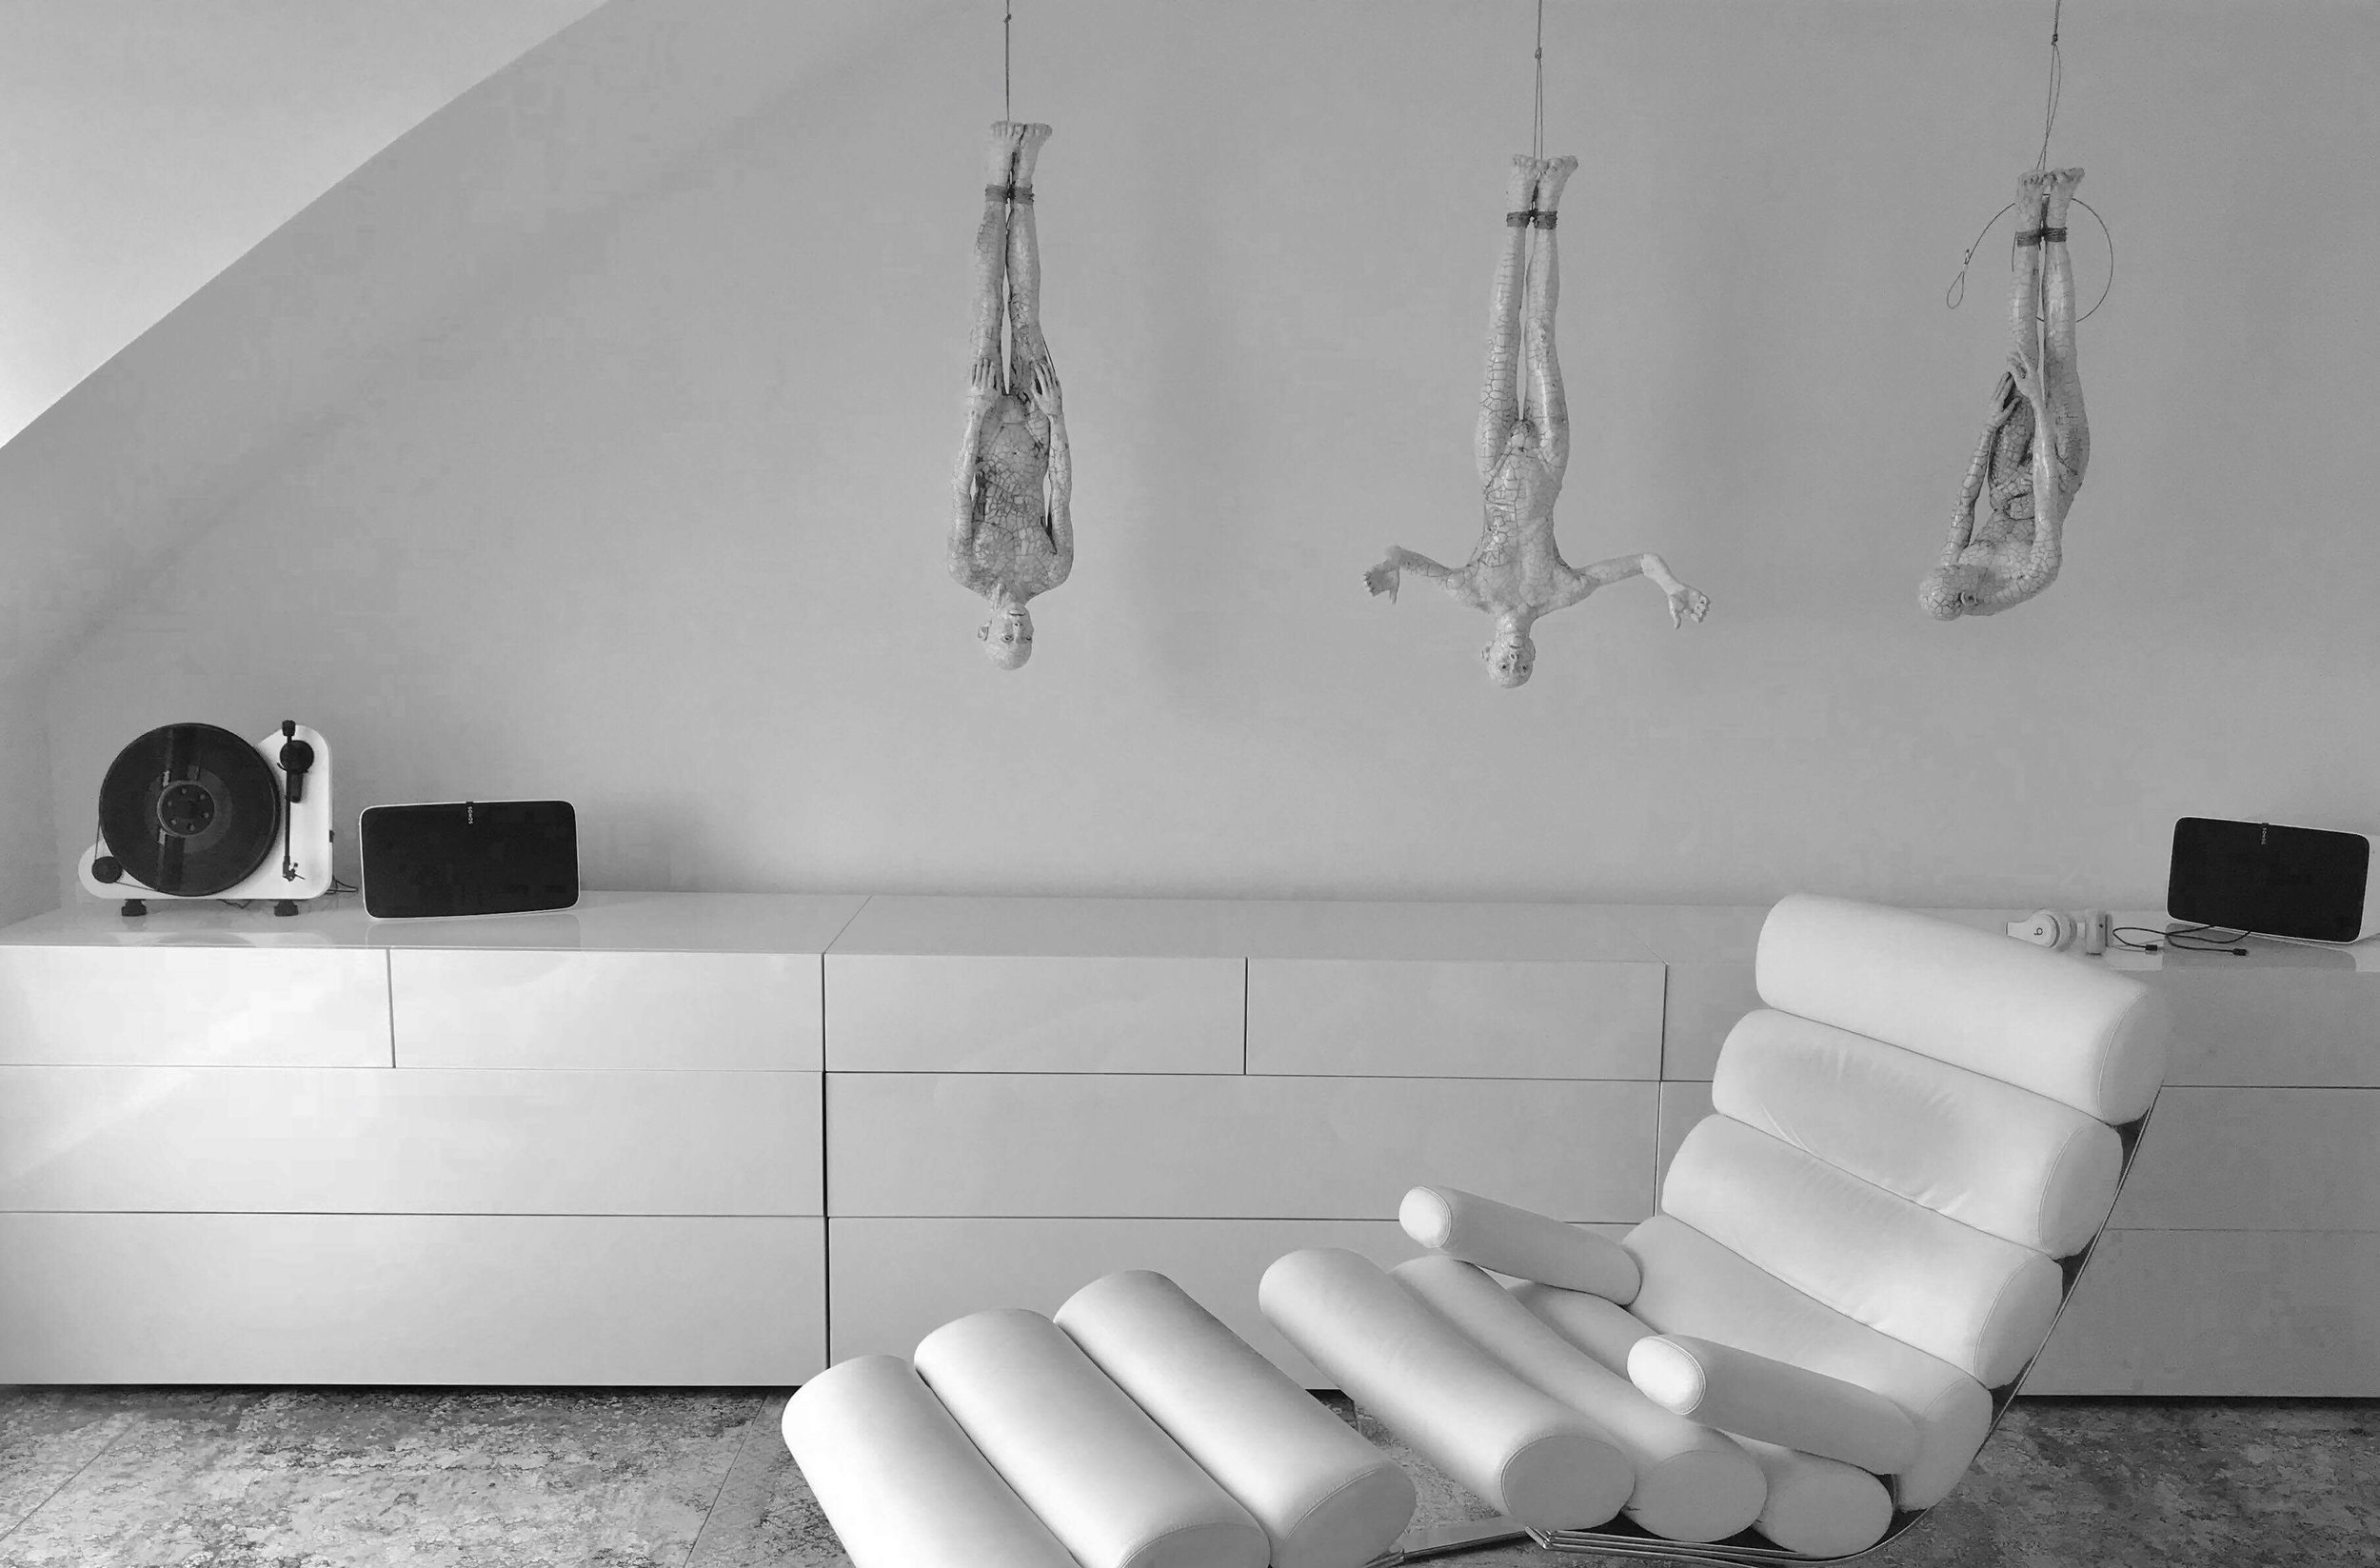  3 Hanging Butoh Figures, installation view in collector home, Hamburg, Germany. 